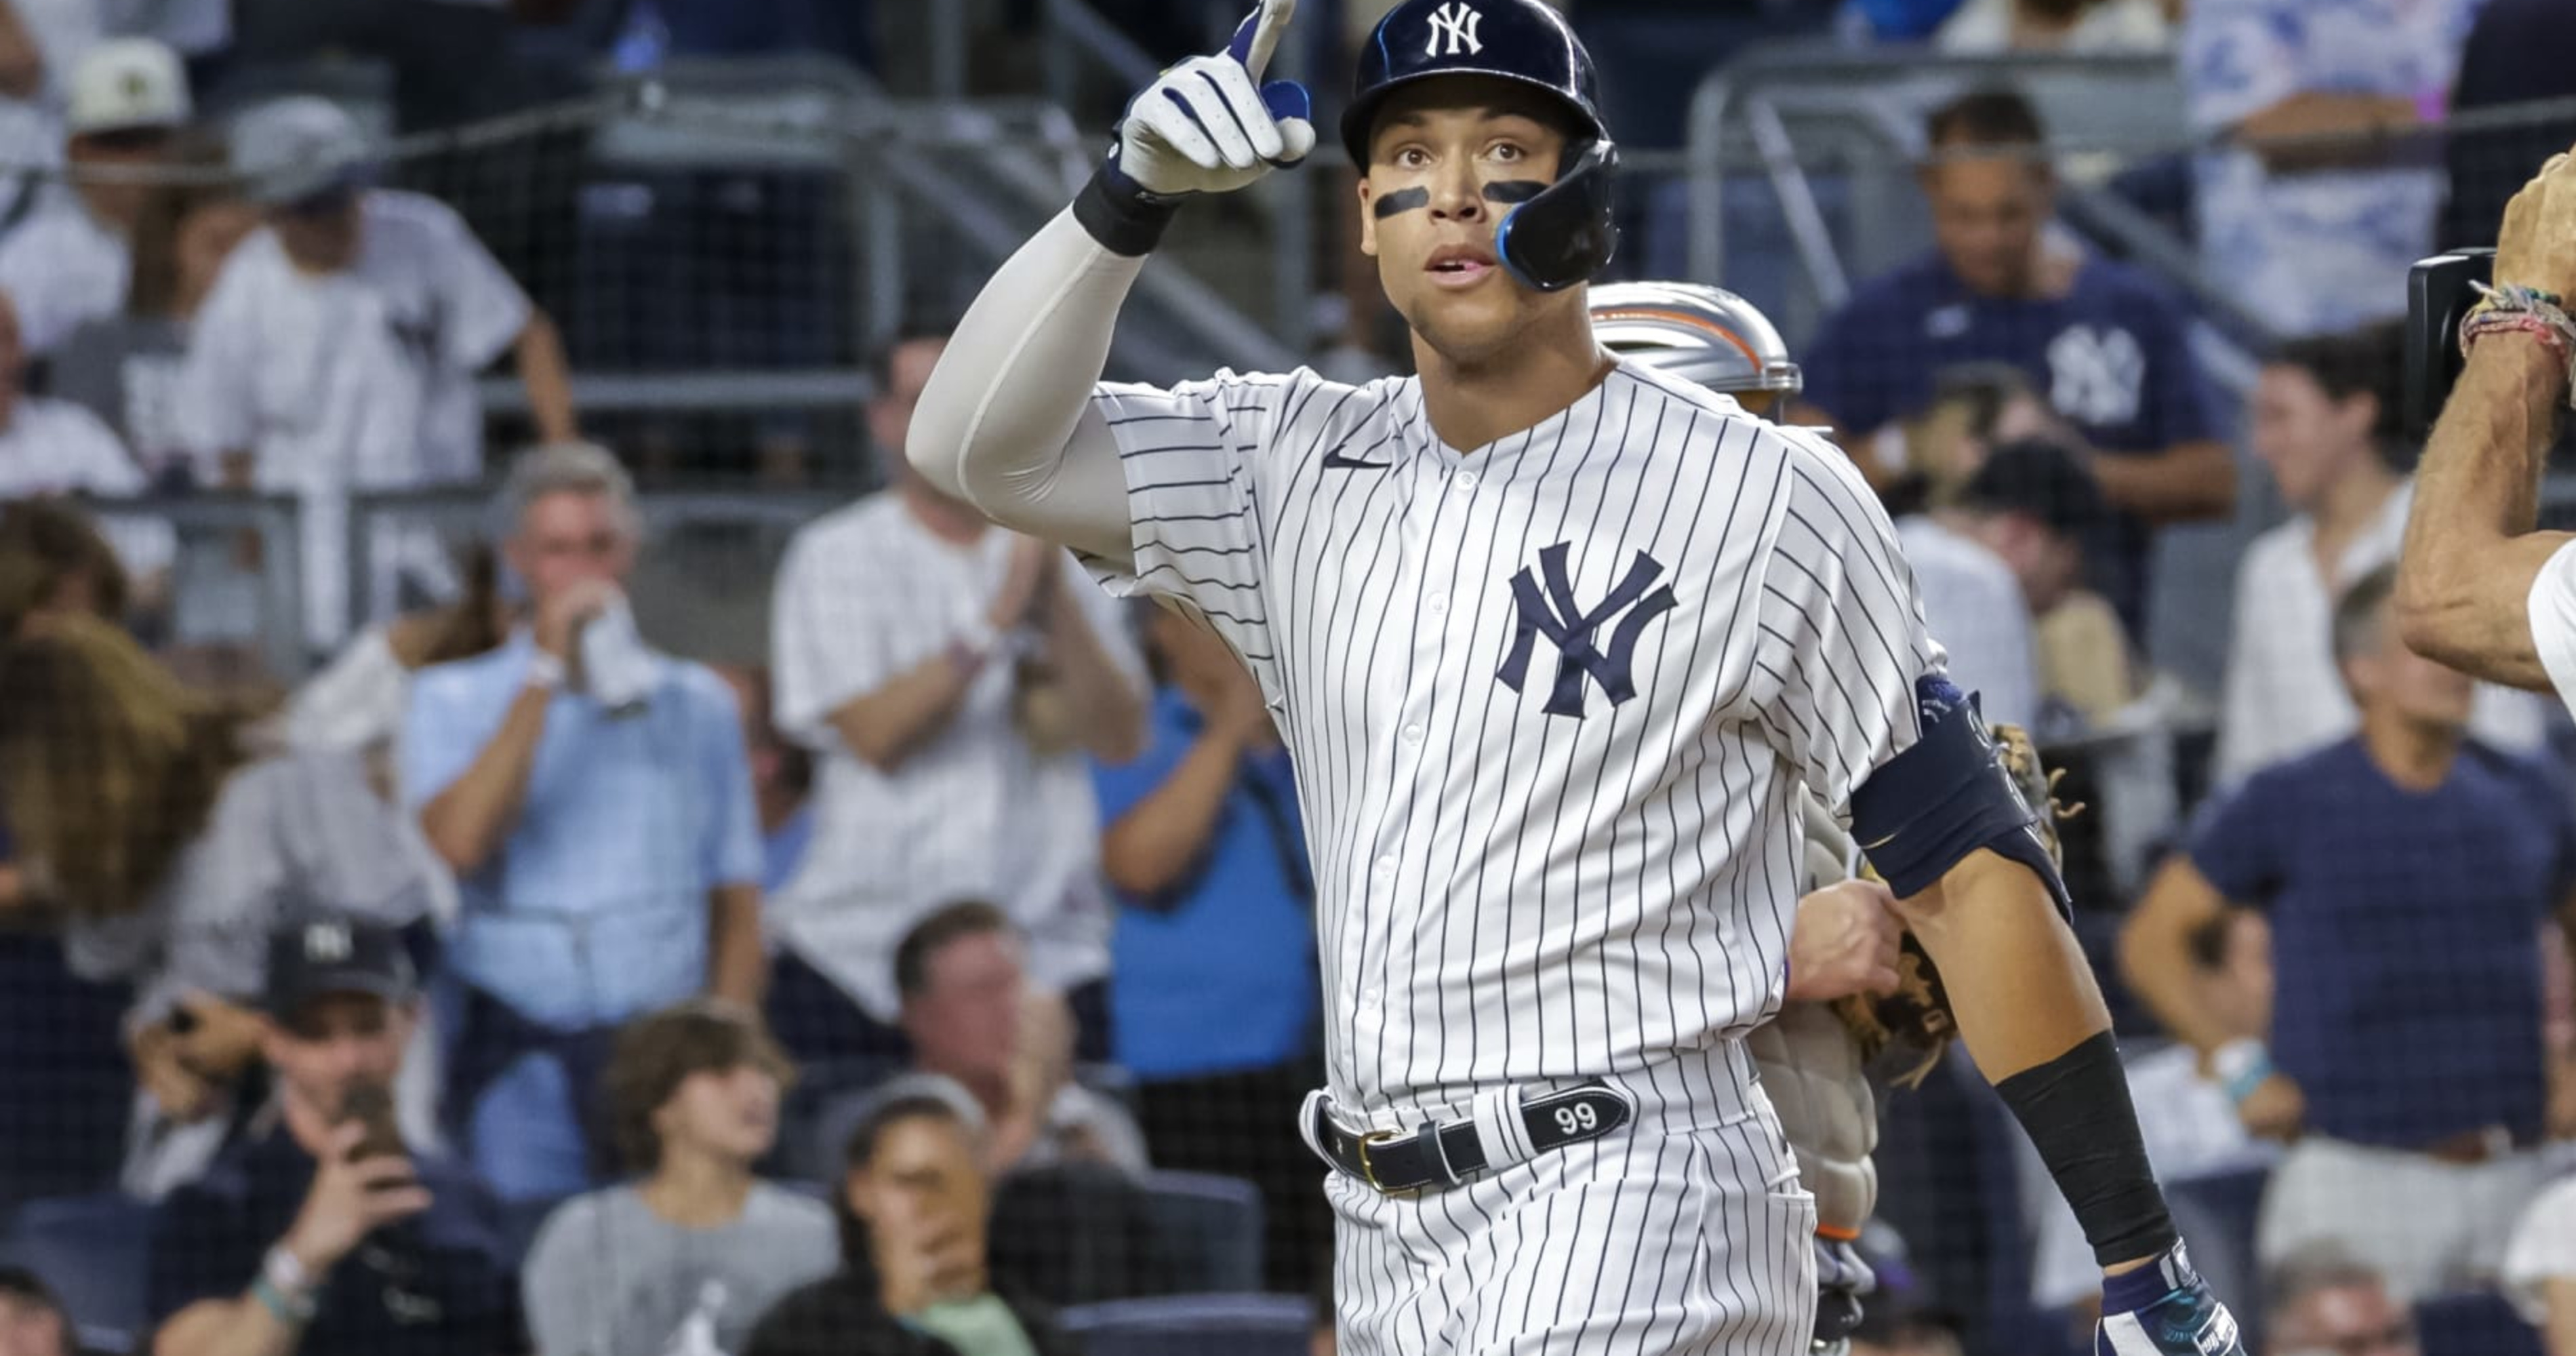 Aaron Judge's Yankees frustration comes out during free agency